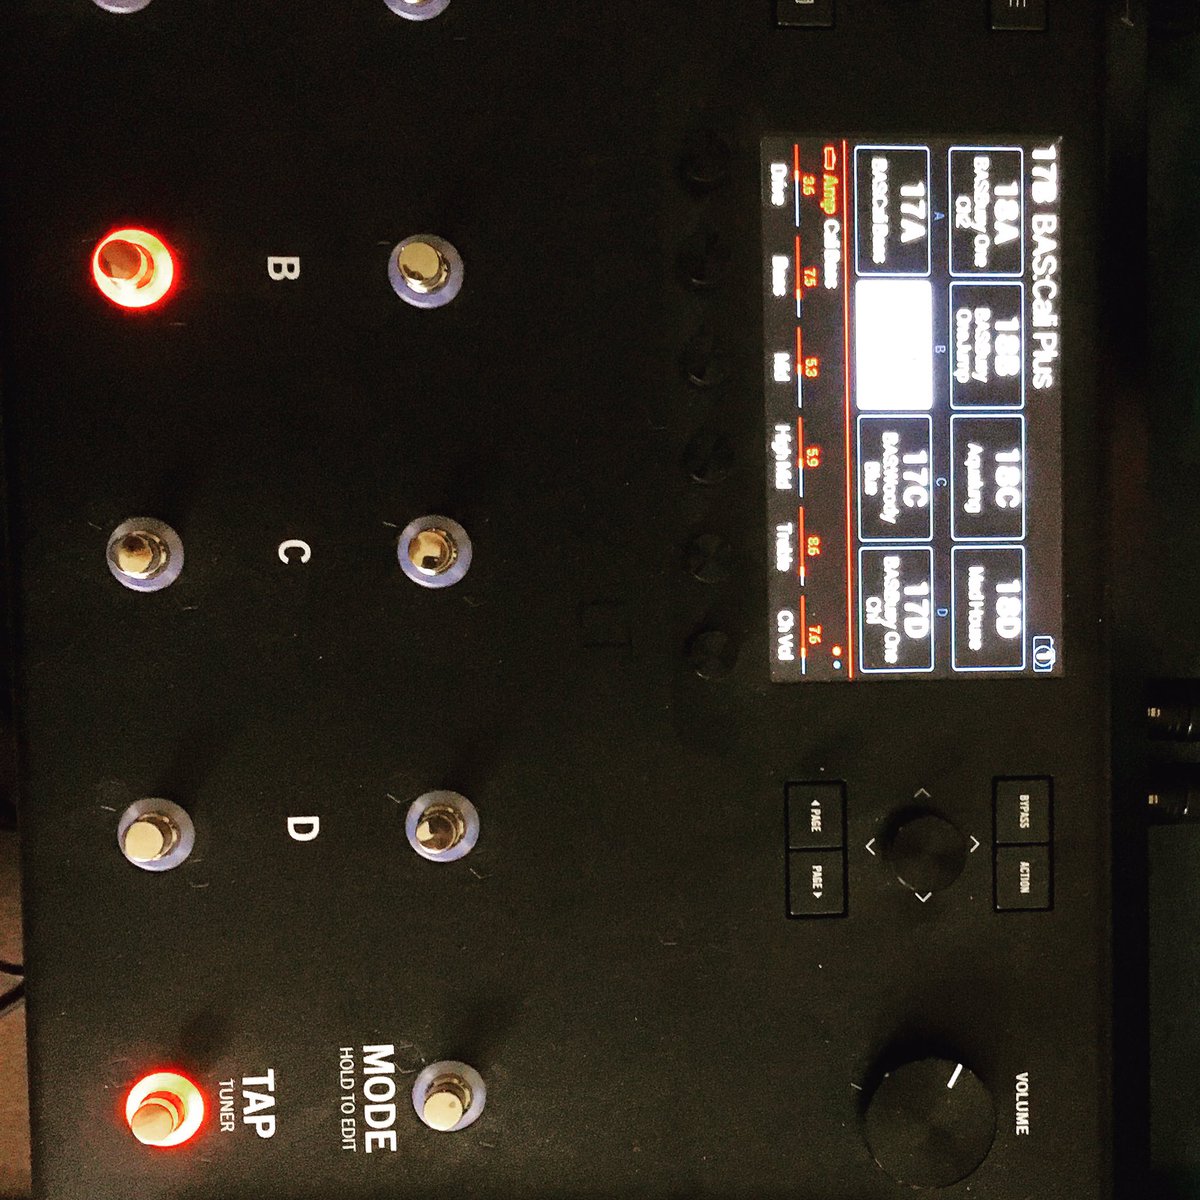 Today working on new bass sounds with my #helix @Line6. I’m so happy with this great #guitarprocessor!